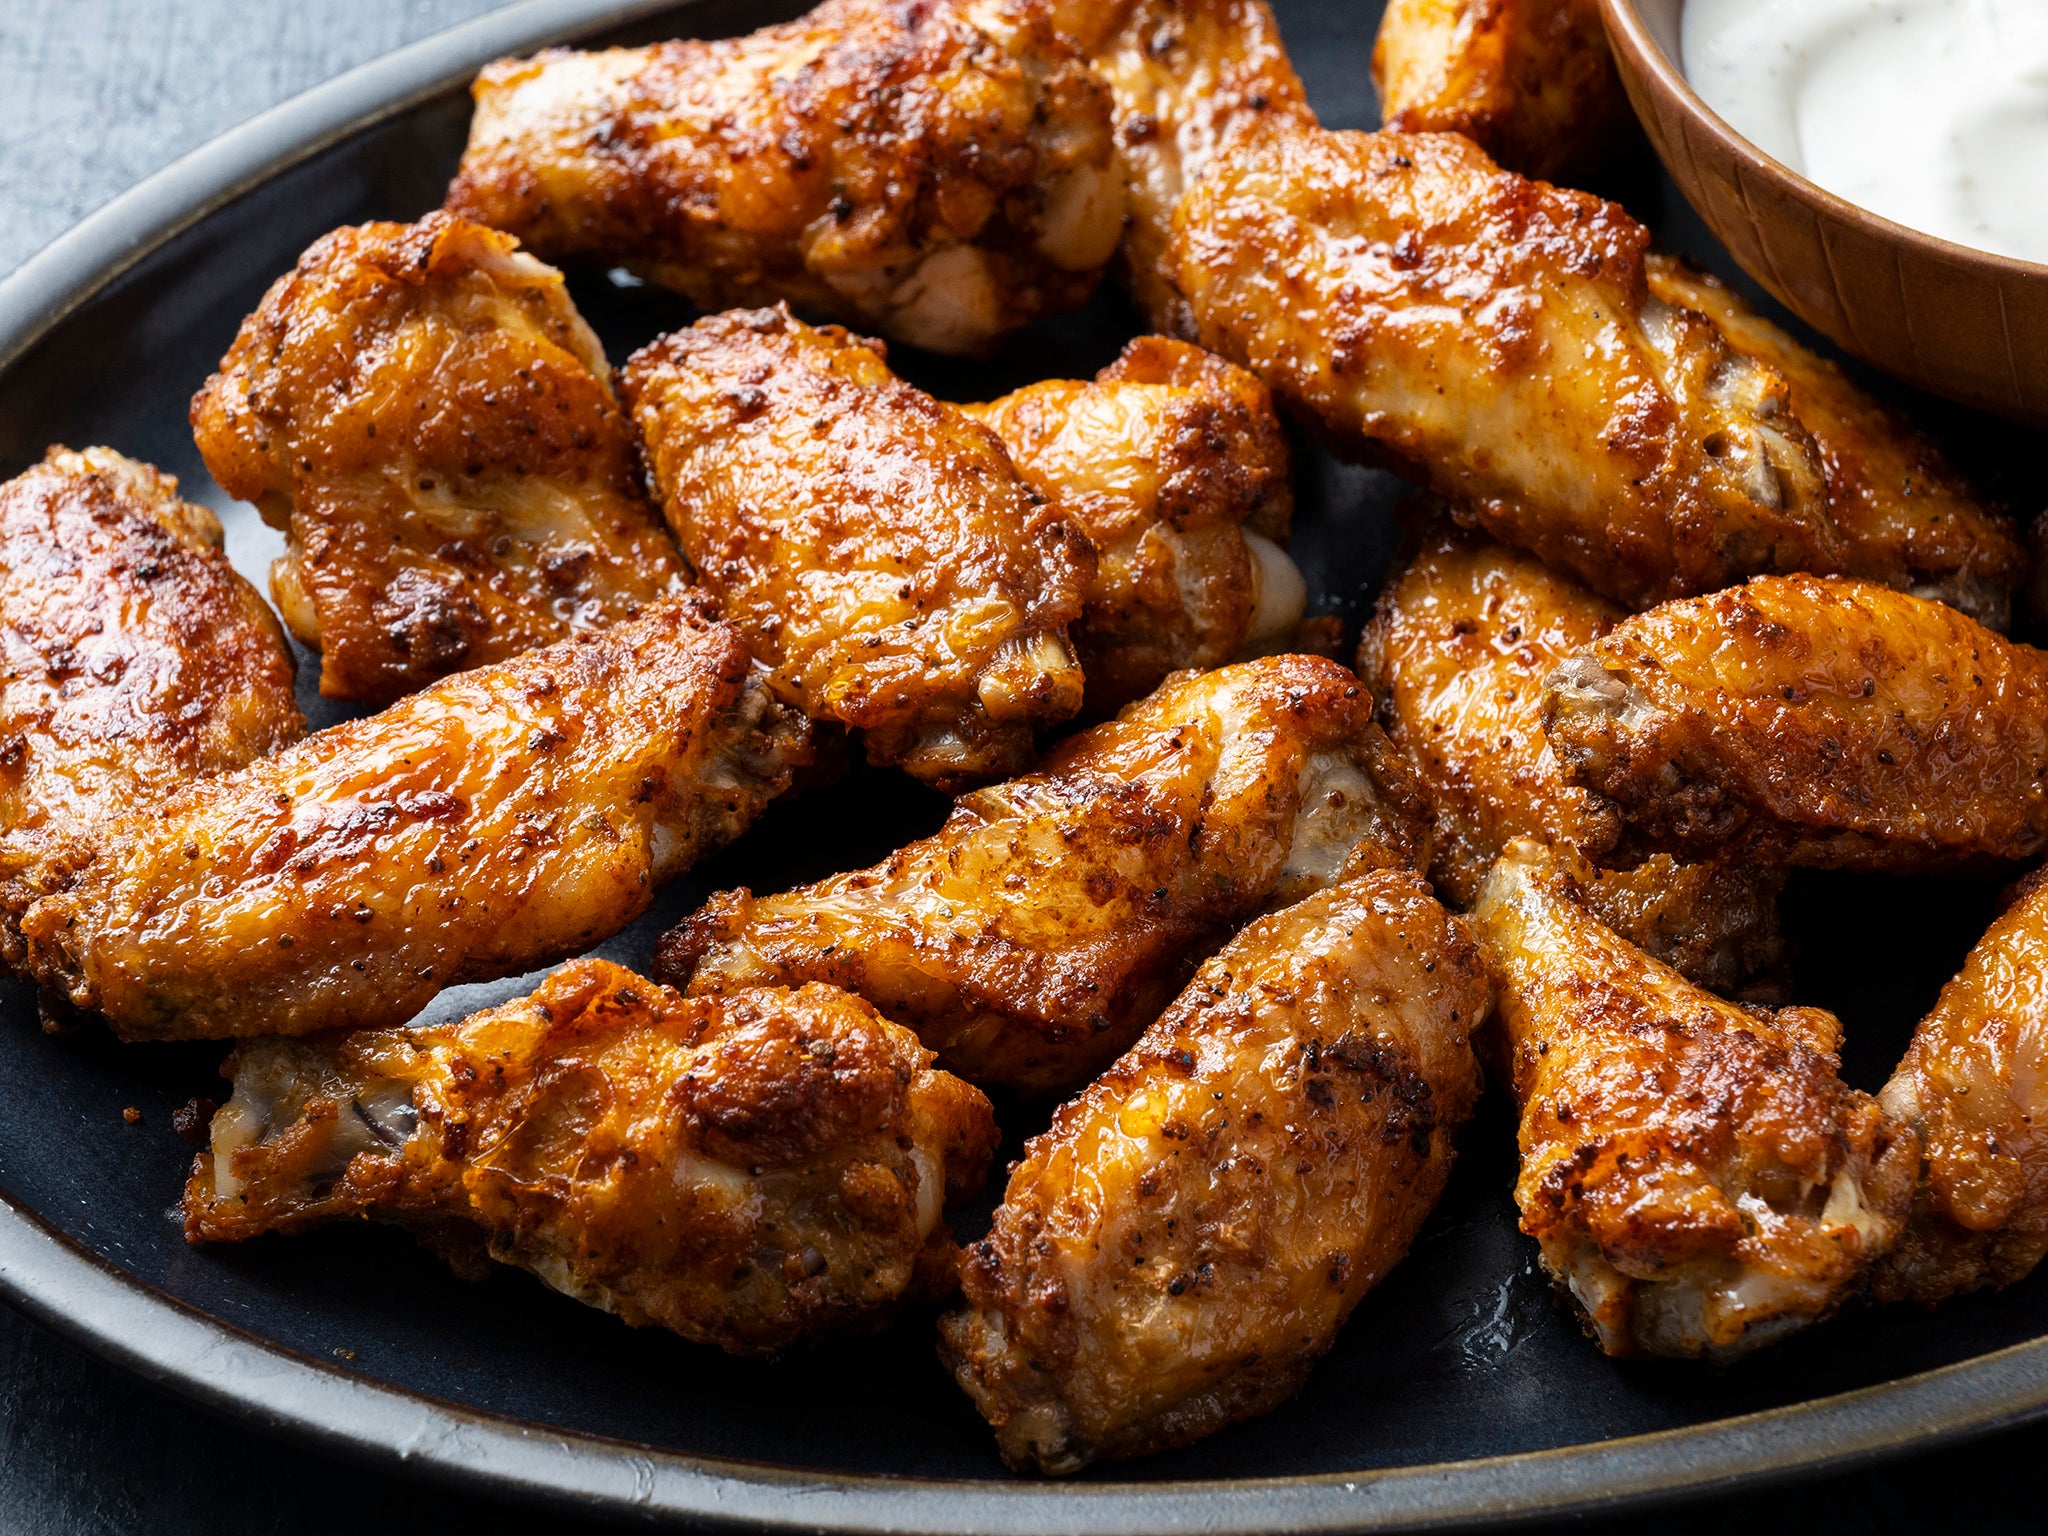 These wings are easy, quick and irresistible